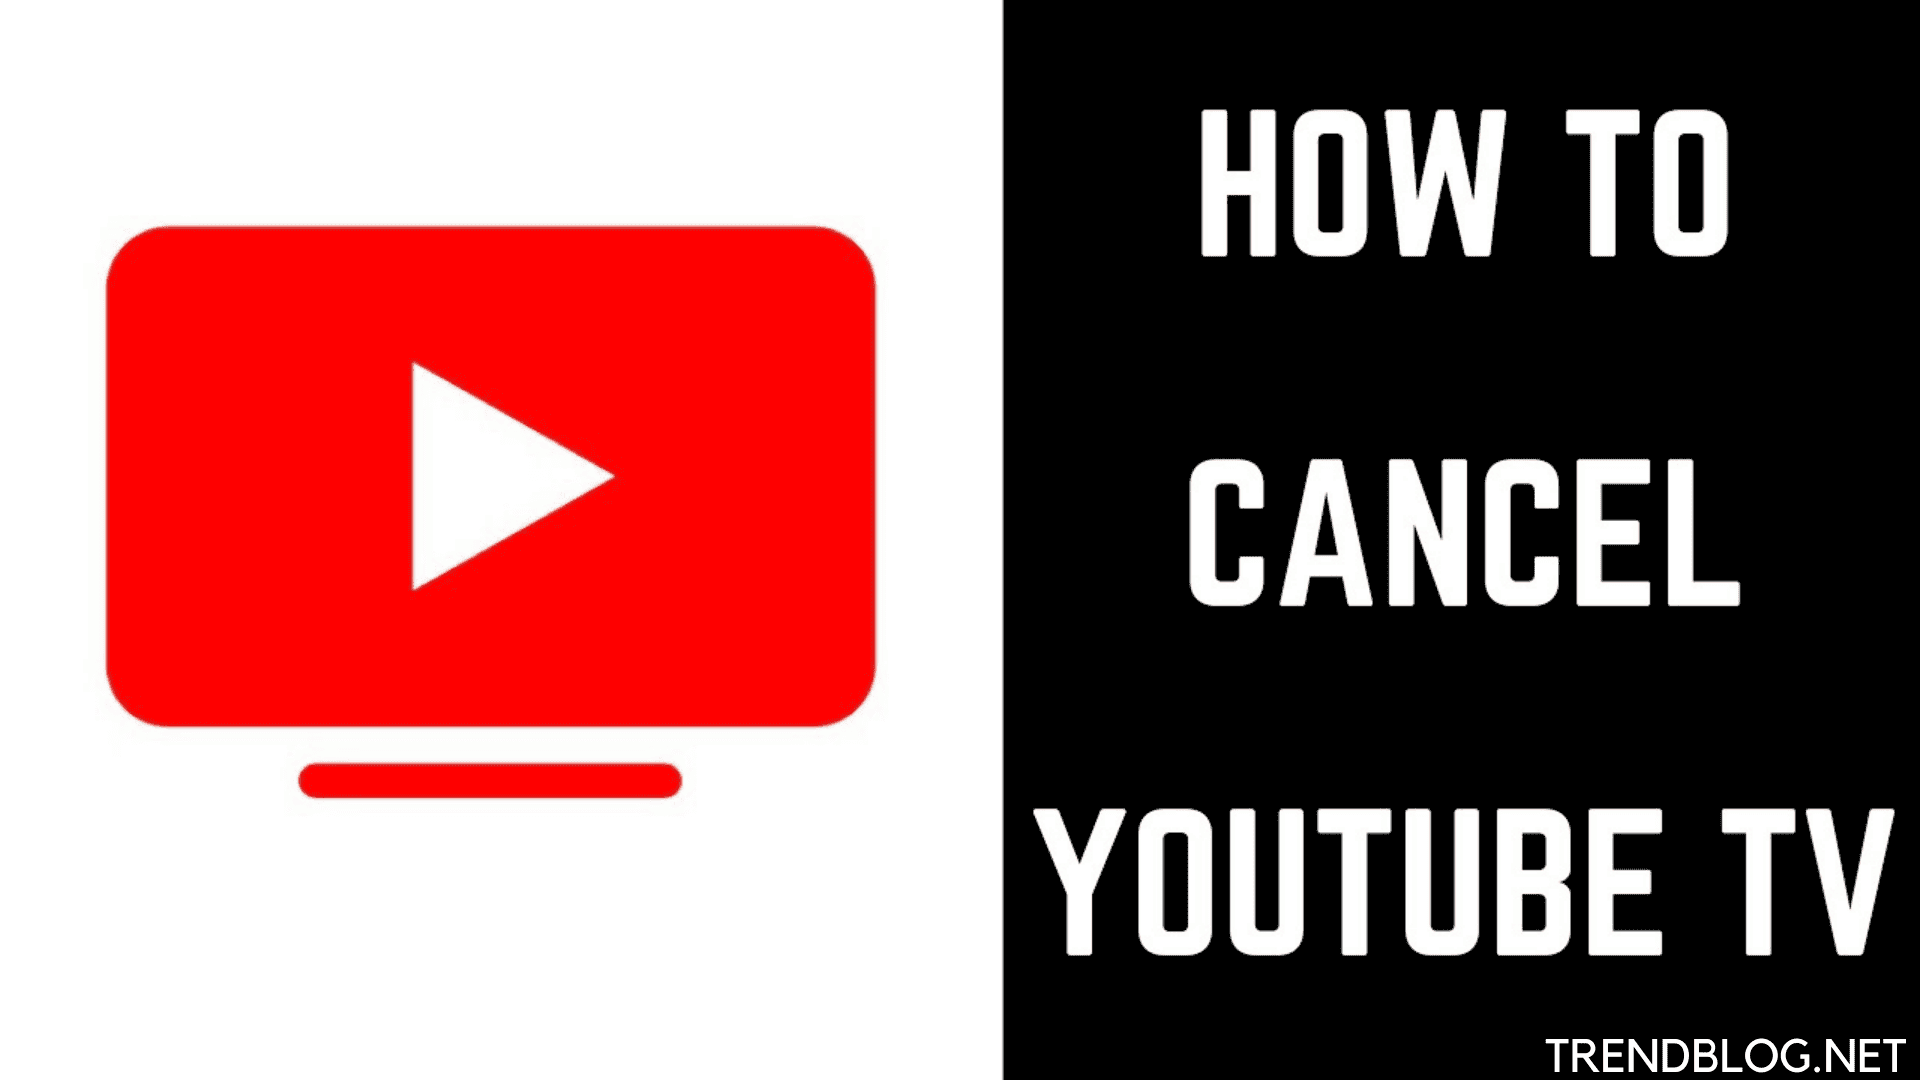  Guide for How to Cancel Youtube Tv Using Android, iPhone, Computer